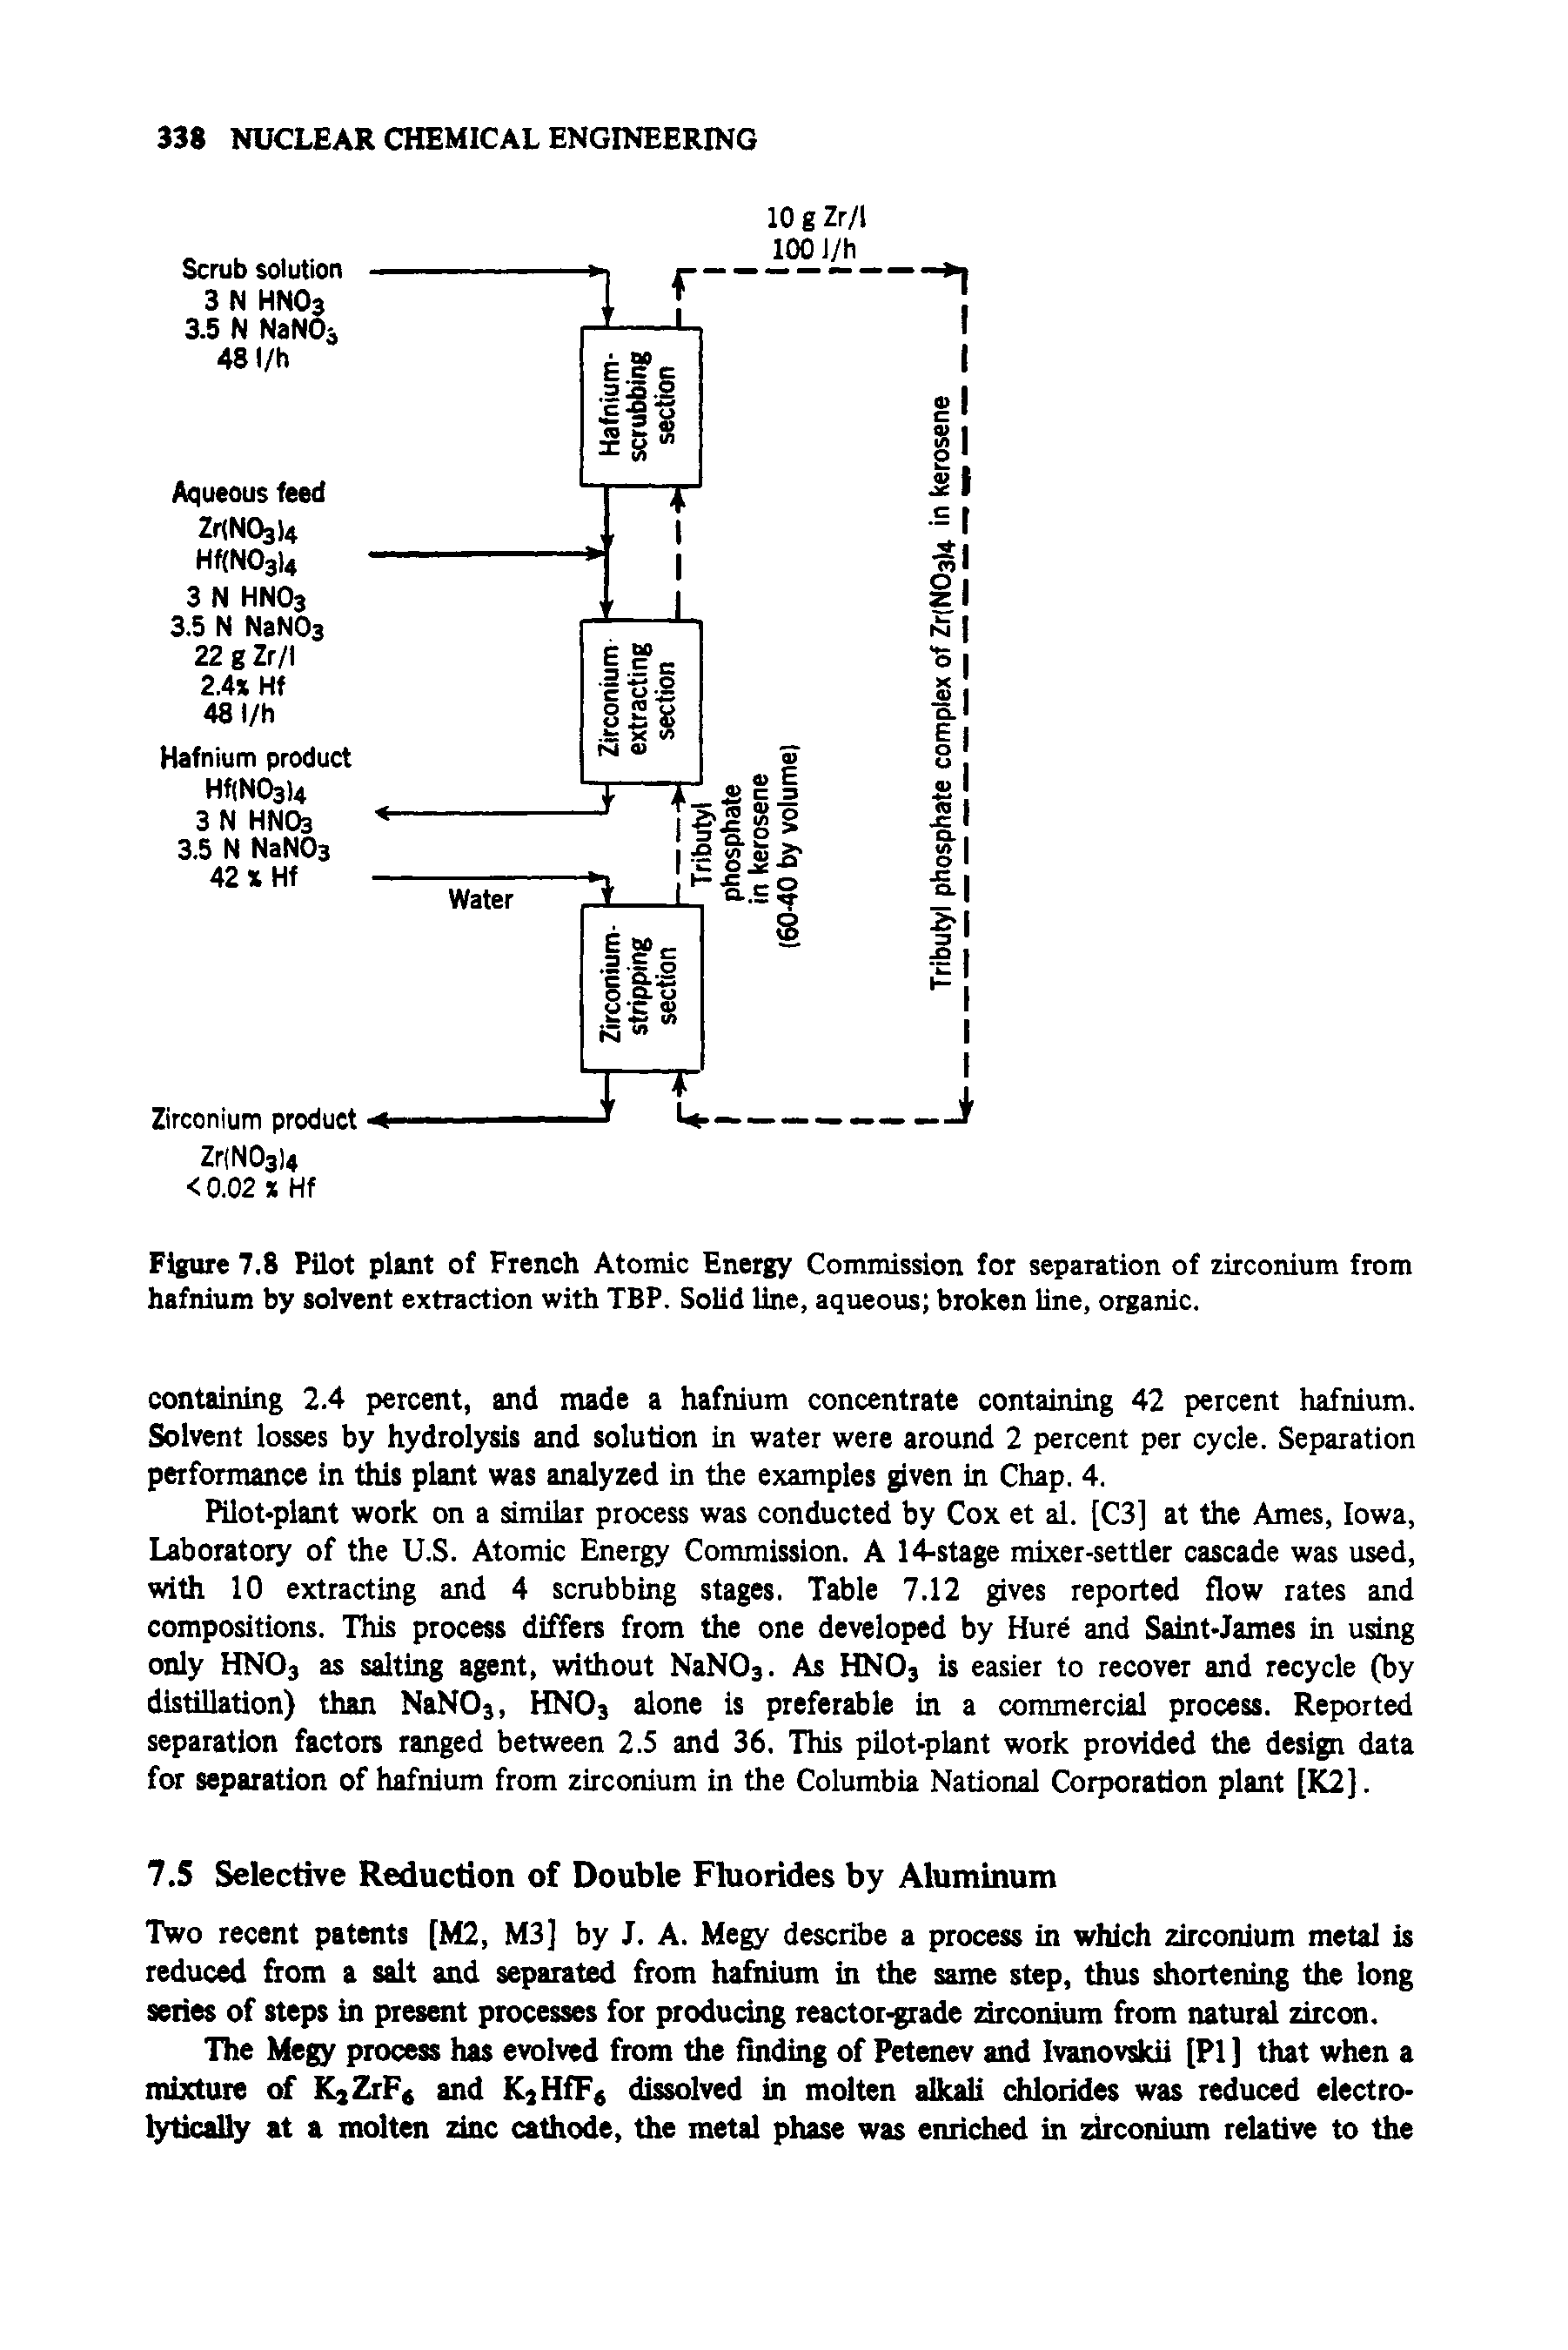 Figure 7.8 Pilot plant of French Atomic Energy Commission for separation of zirconium from hafnium by solvent extraction with TBP. Solid line, aqueous broken Une, organic.